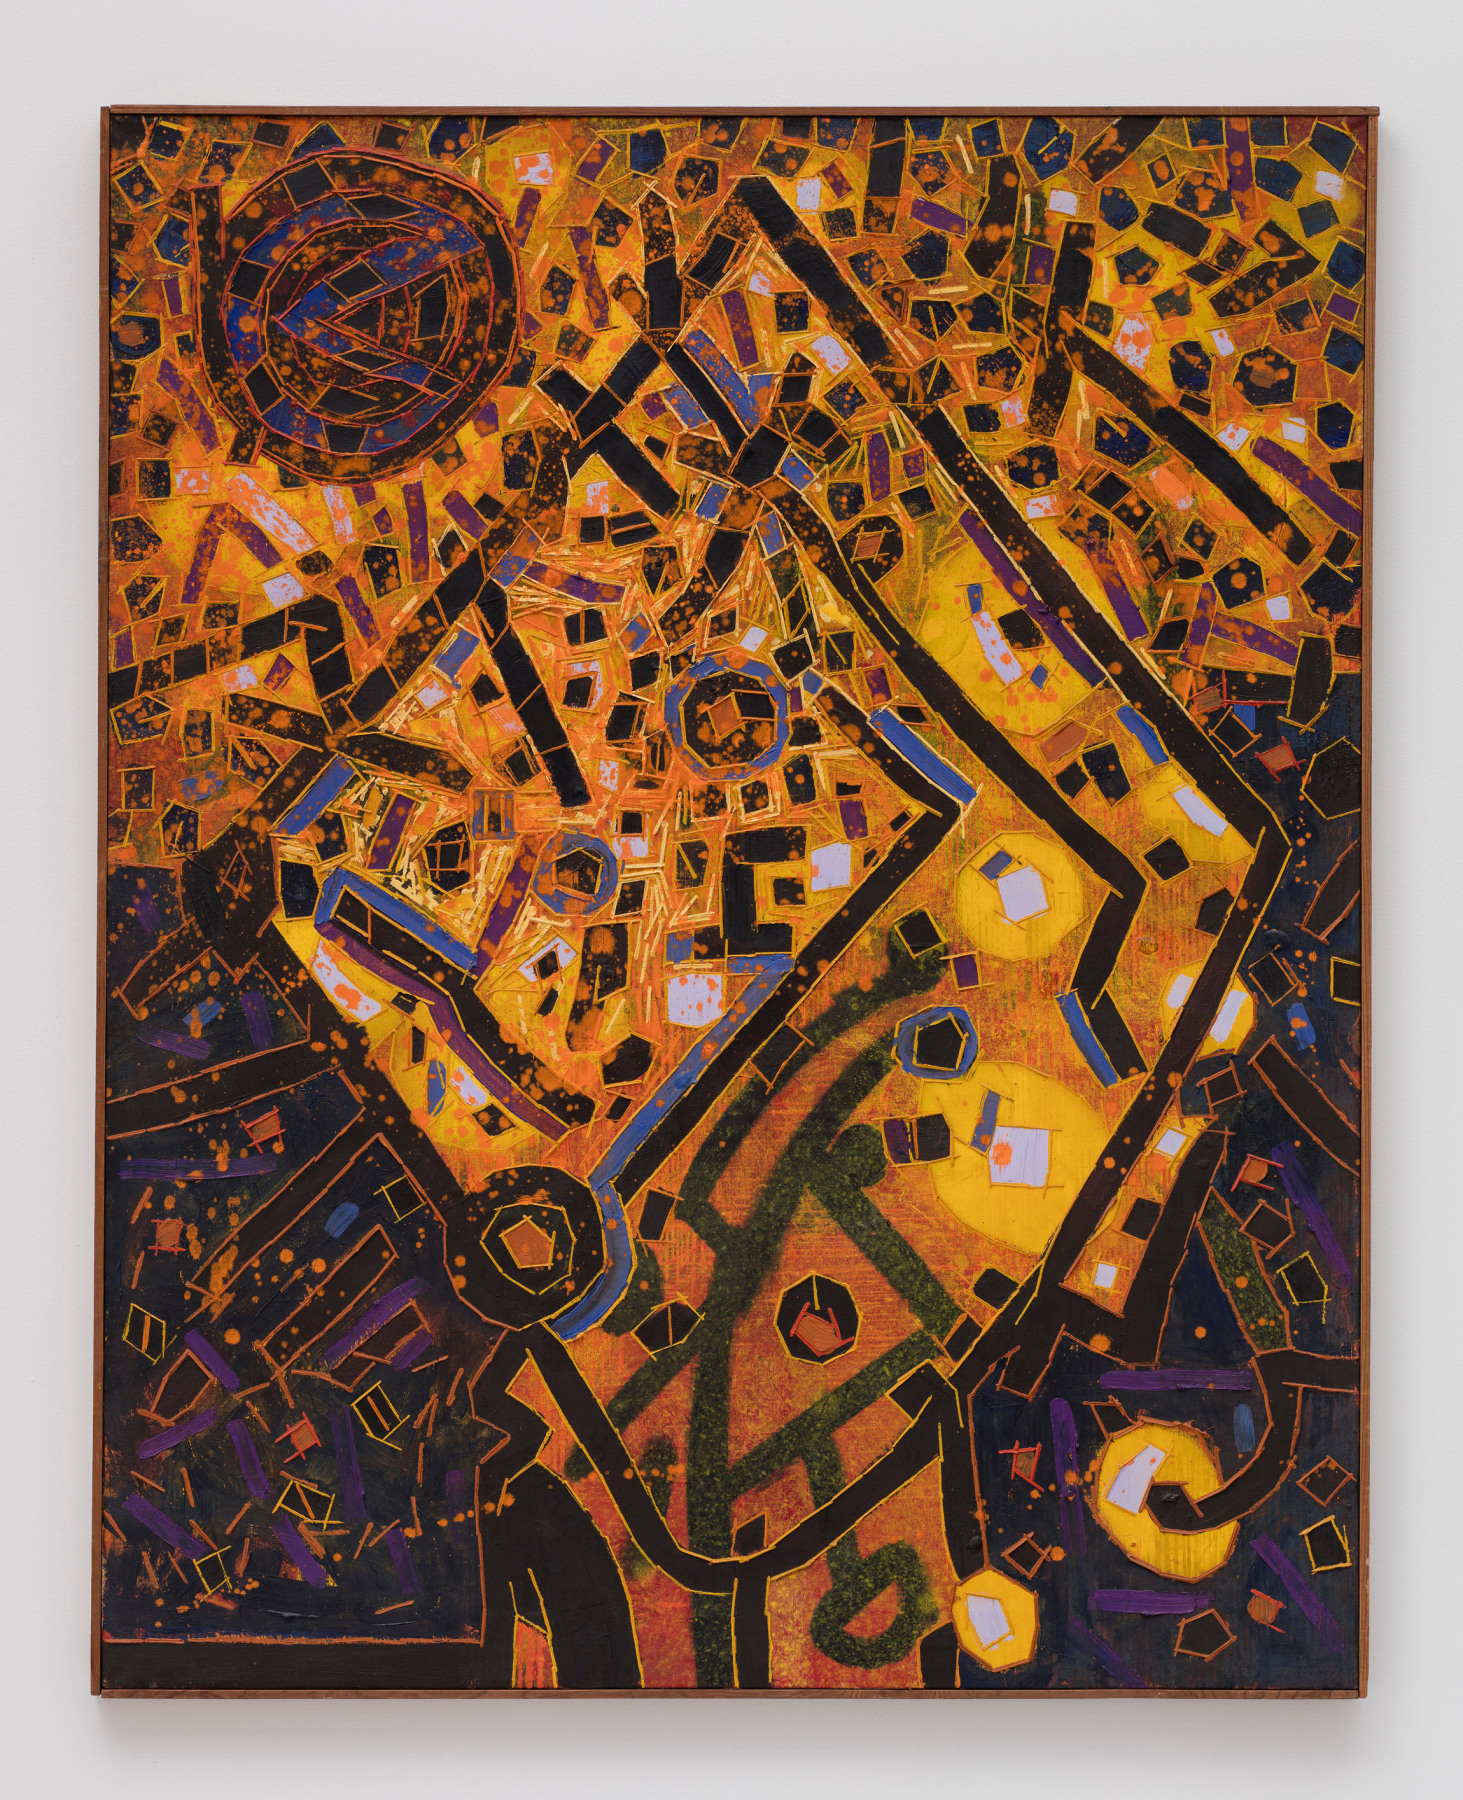 Image of LEE MULLICAN's Flying, 1965